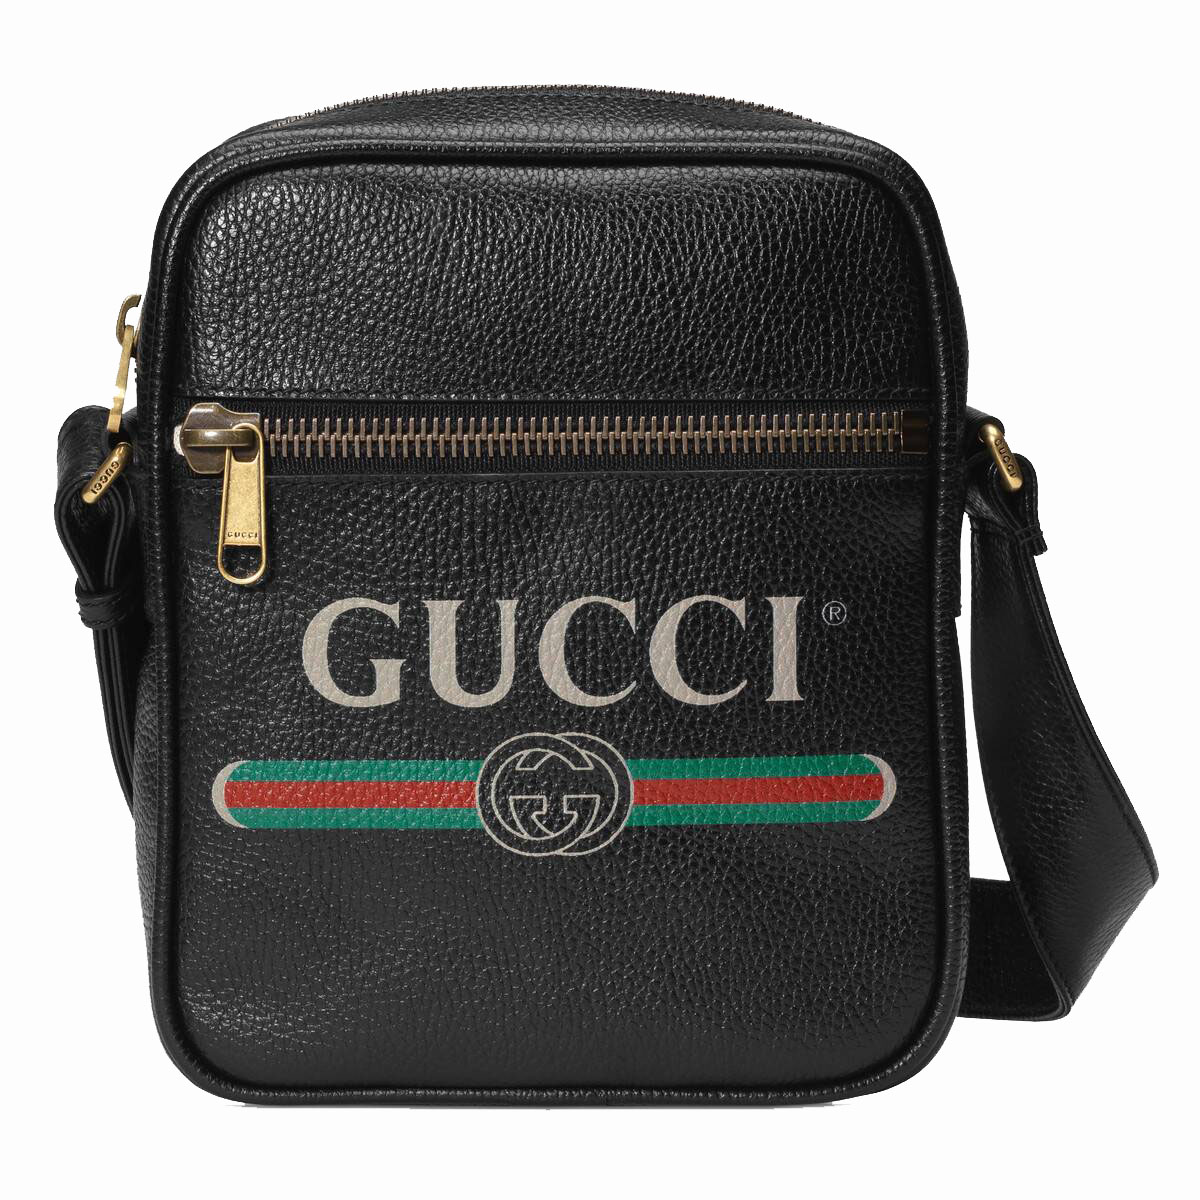 WMNS) GUCCI Logo Leather Canvas Large Capacity Shoulder Bag Beige / N |  Gucci, Leather, Gucci leather